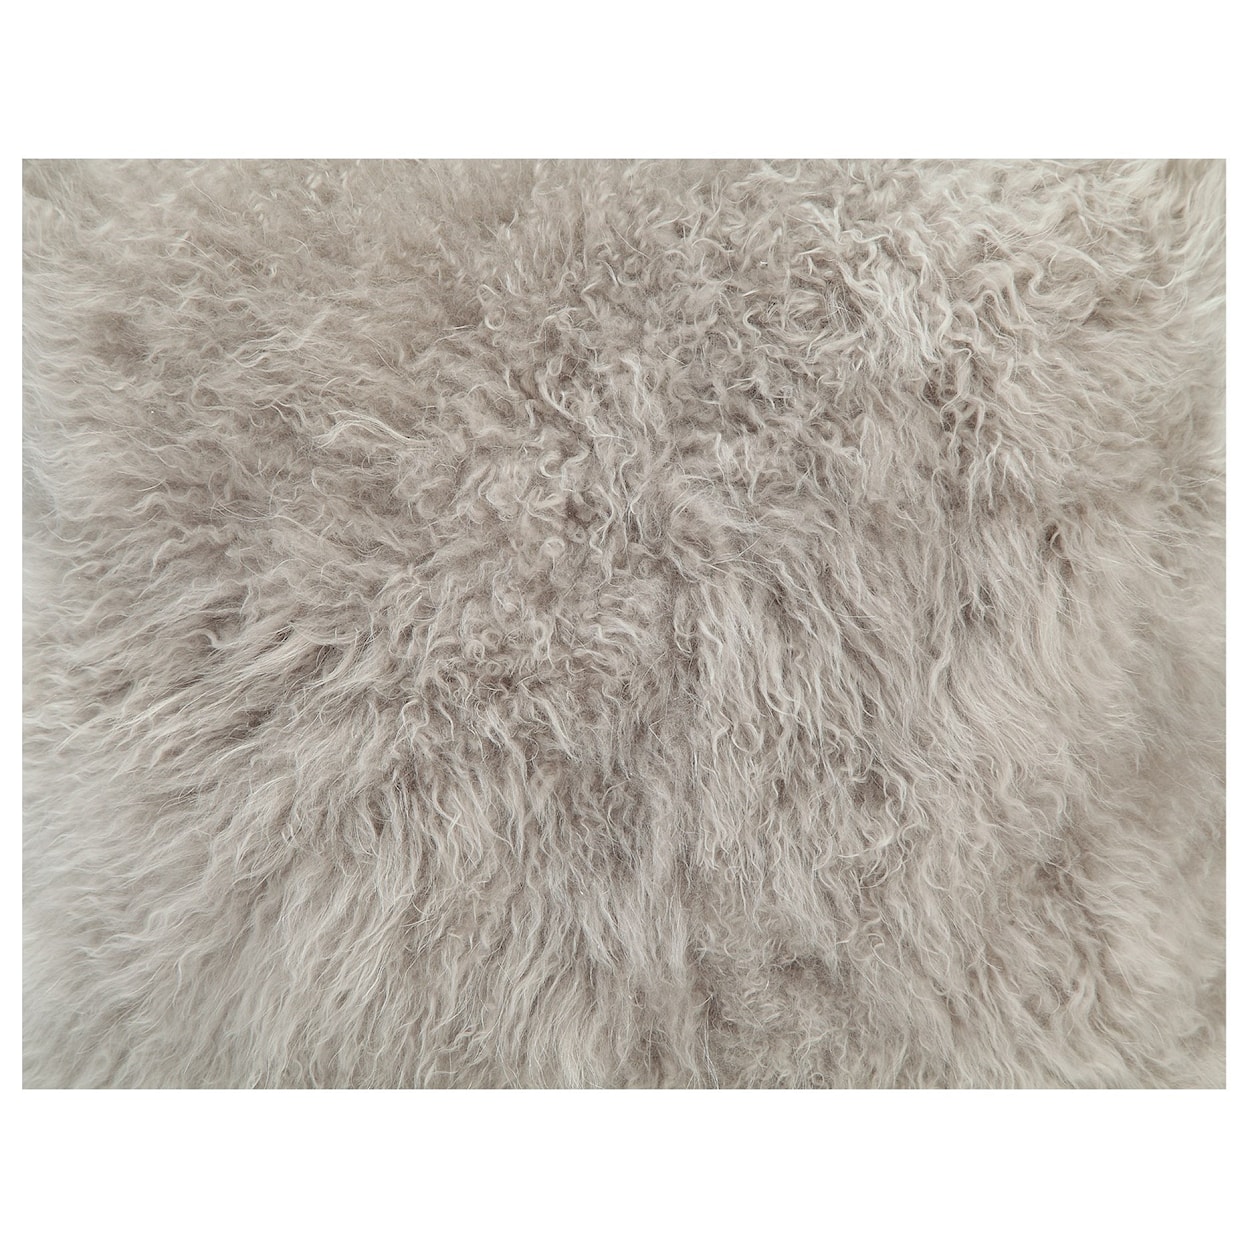 Moe's Home Collection Pillows and Throws Cashmere Fur Pillow Light Grey